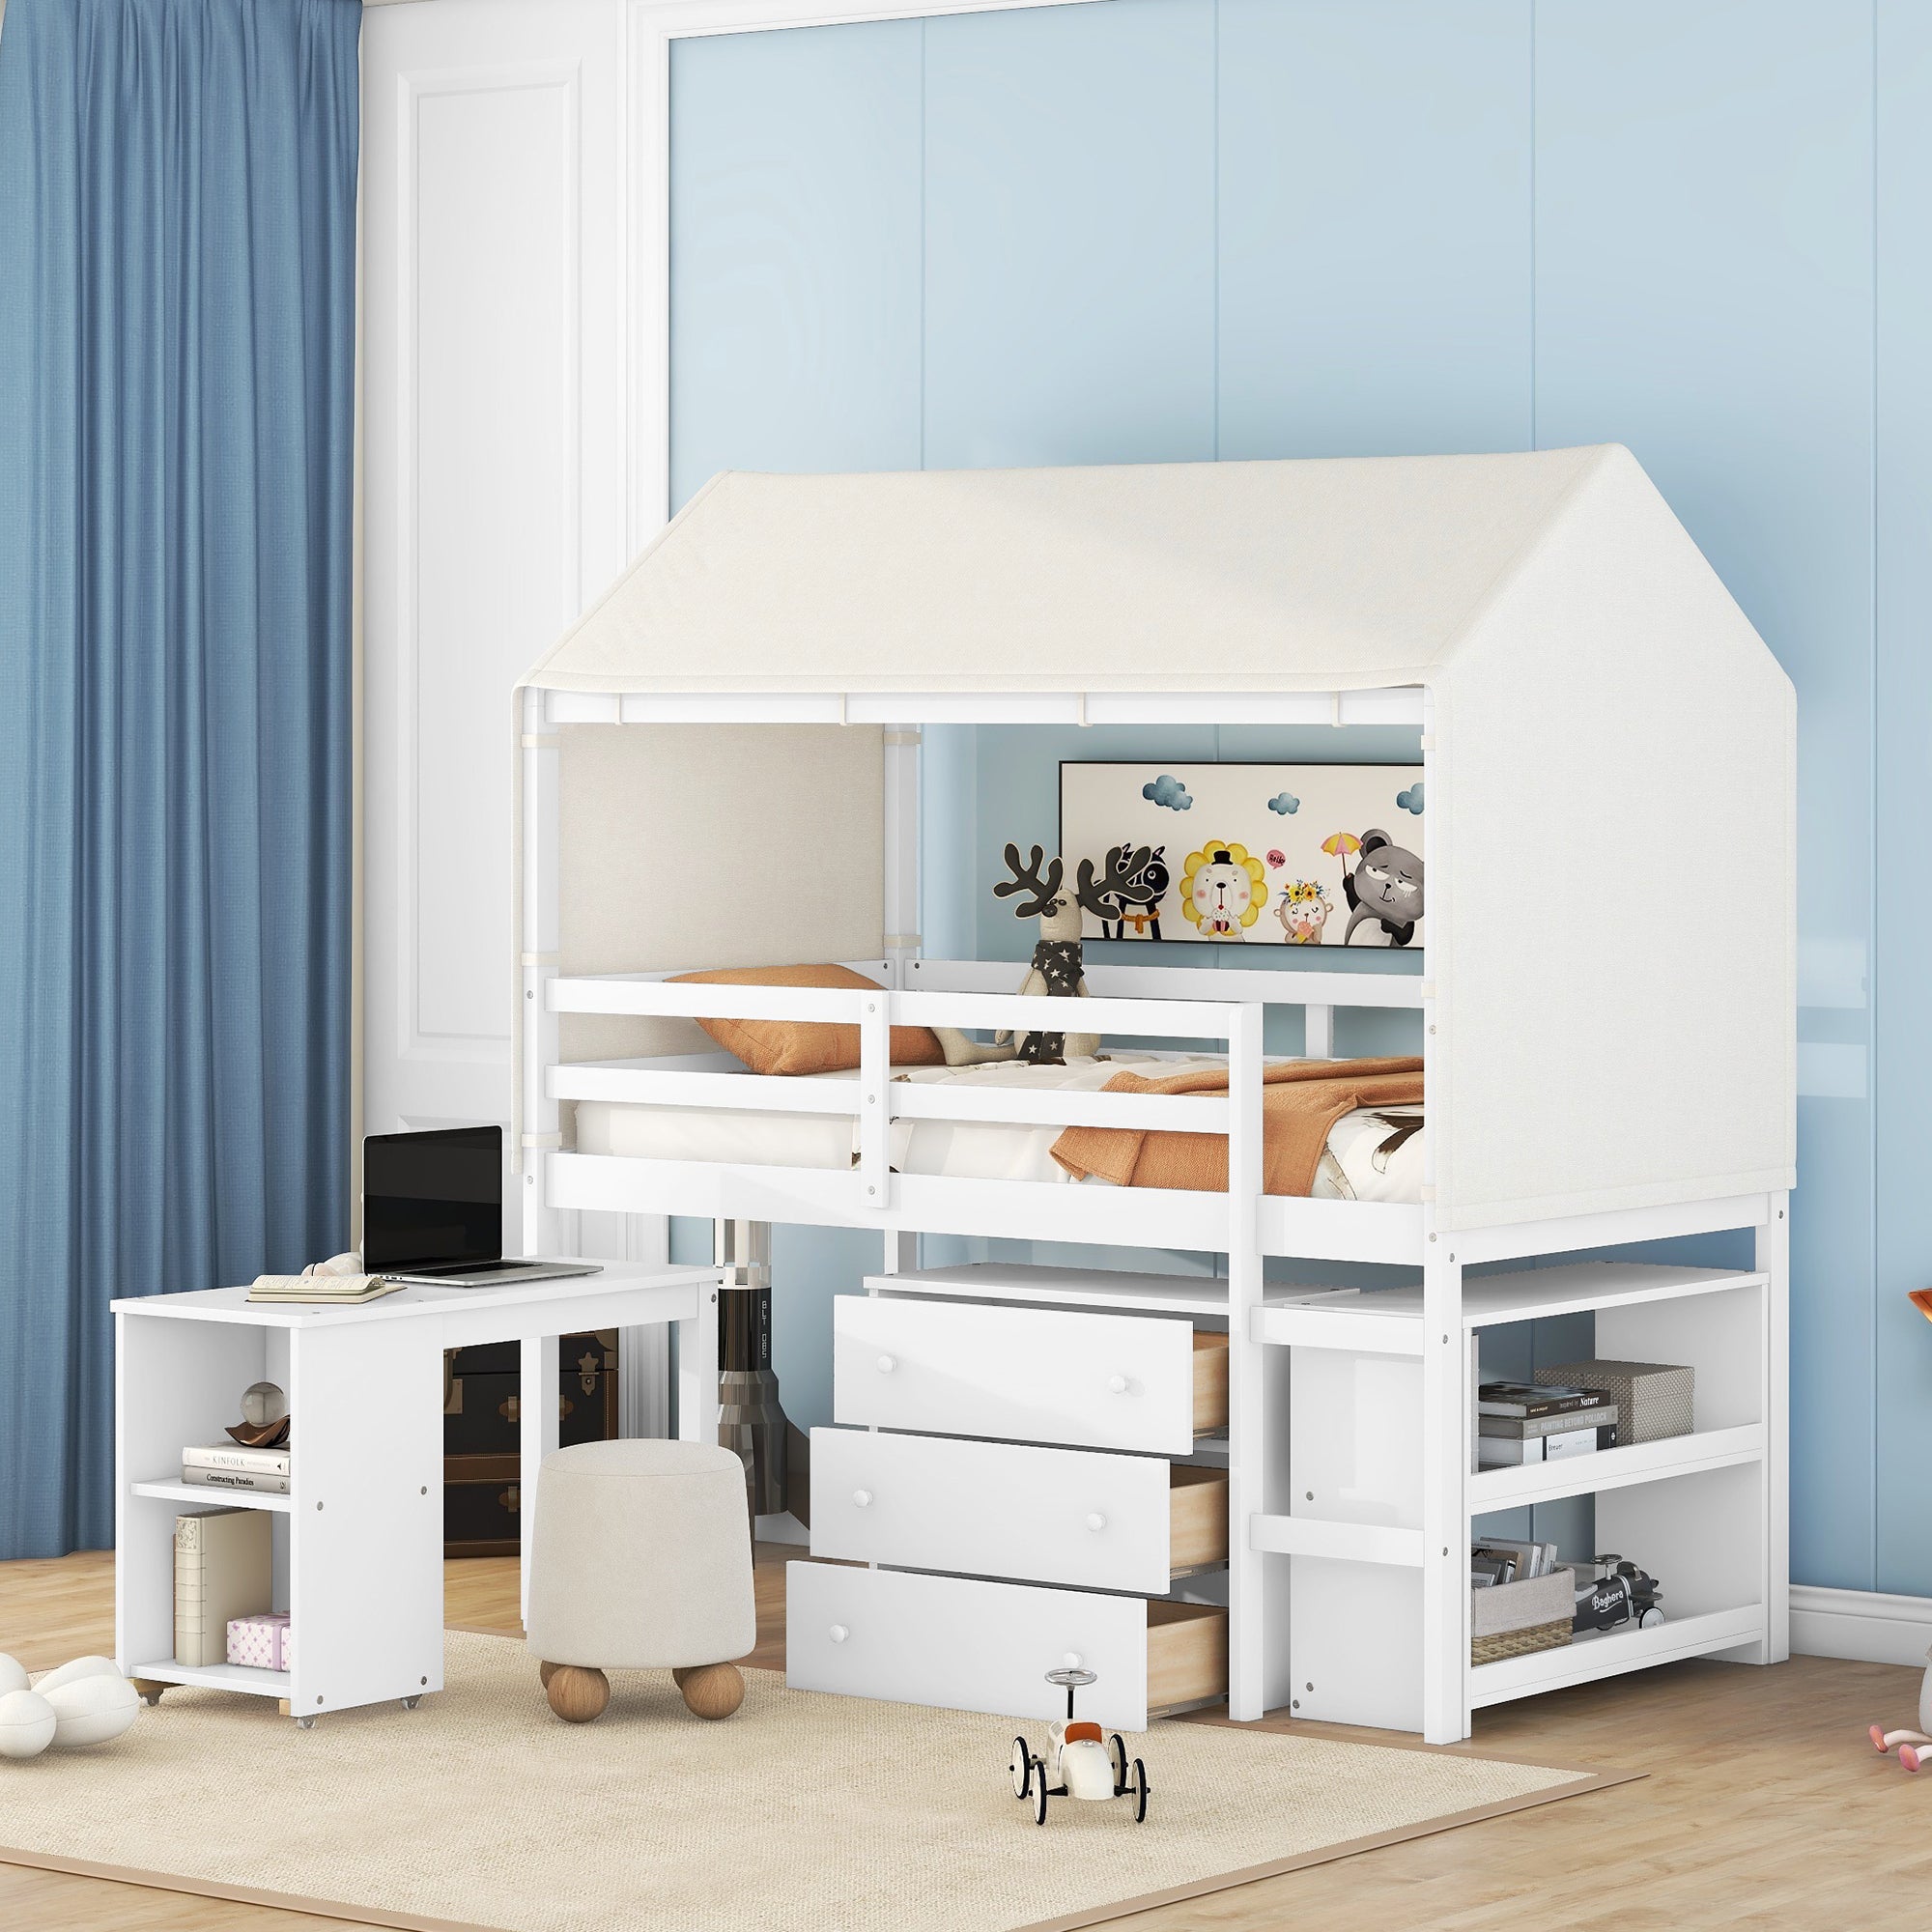 Twin-Size-Loft-Bed-with-Rolling-Cabinet,-Shelf-and-Tent-White-Kids-Beds